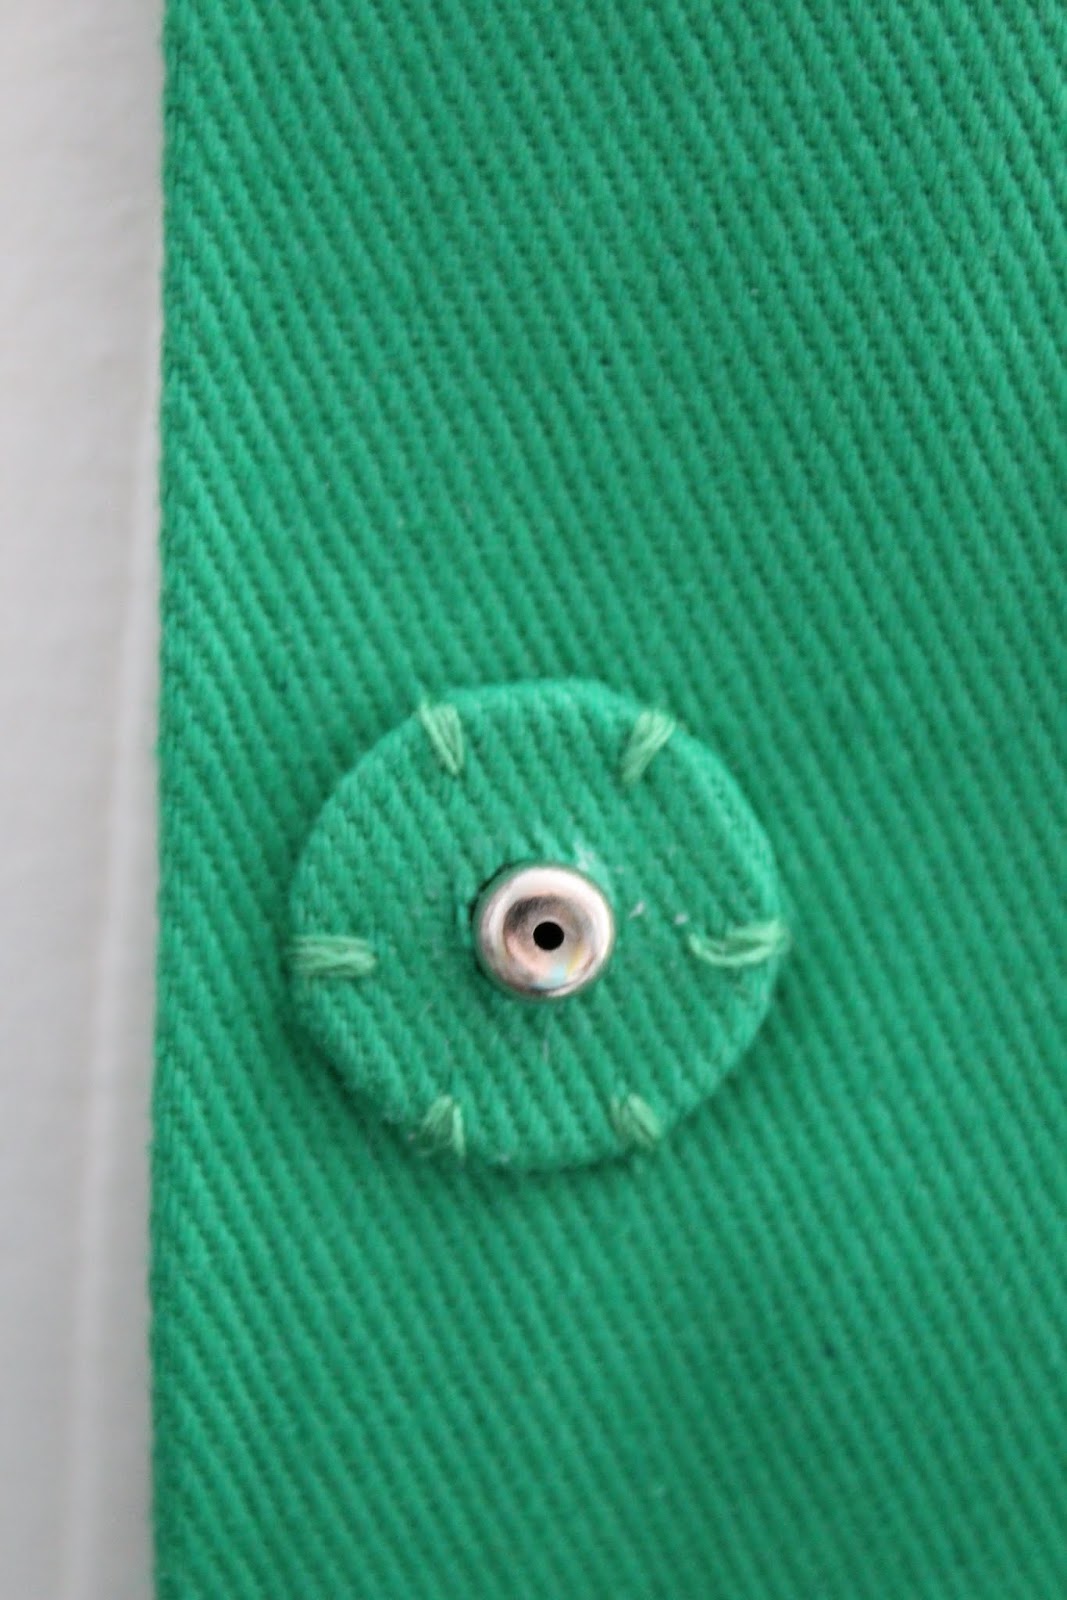 How to attach snaps to fabric - Tidy Mo